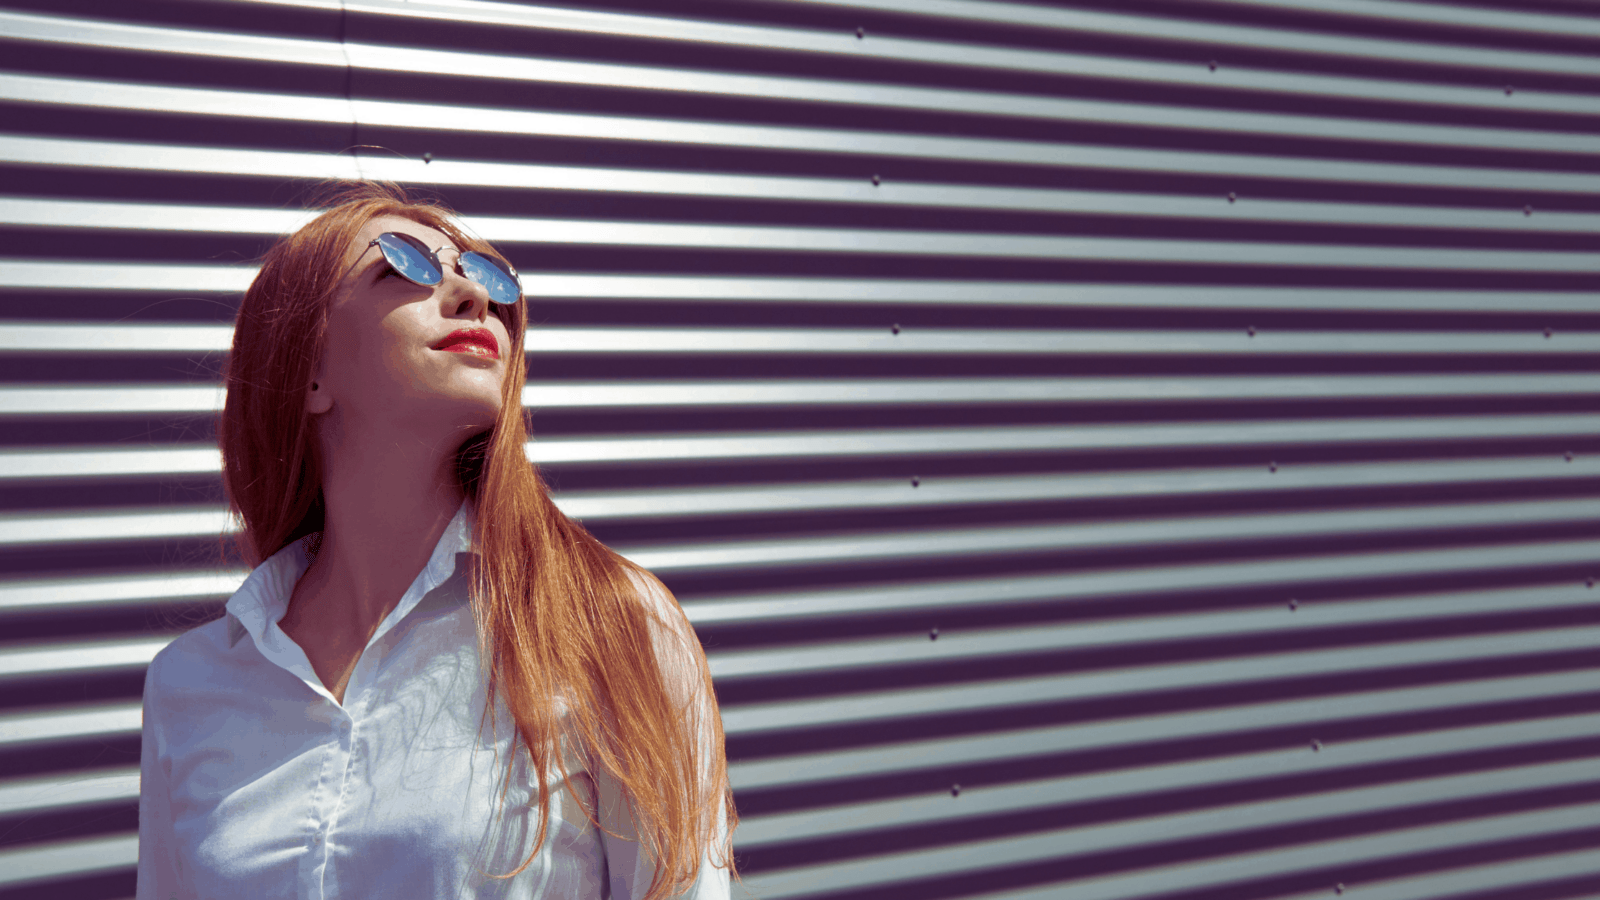 How Redheads Can Get a ‘Healthy Glow’ Without UV Tanning